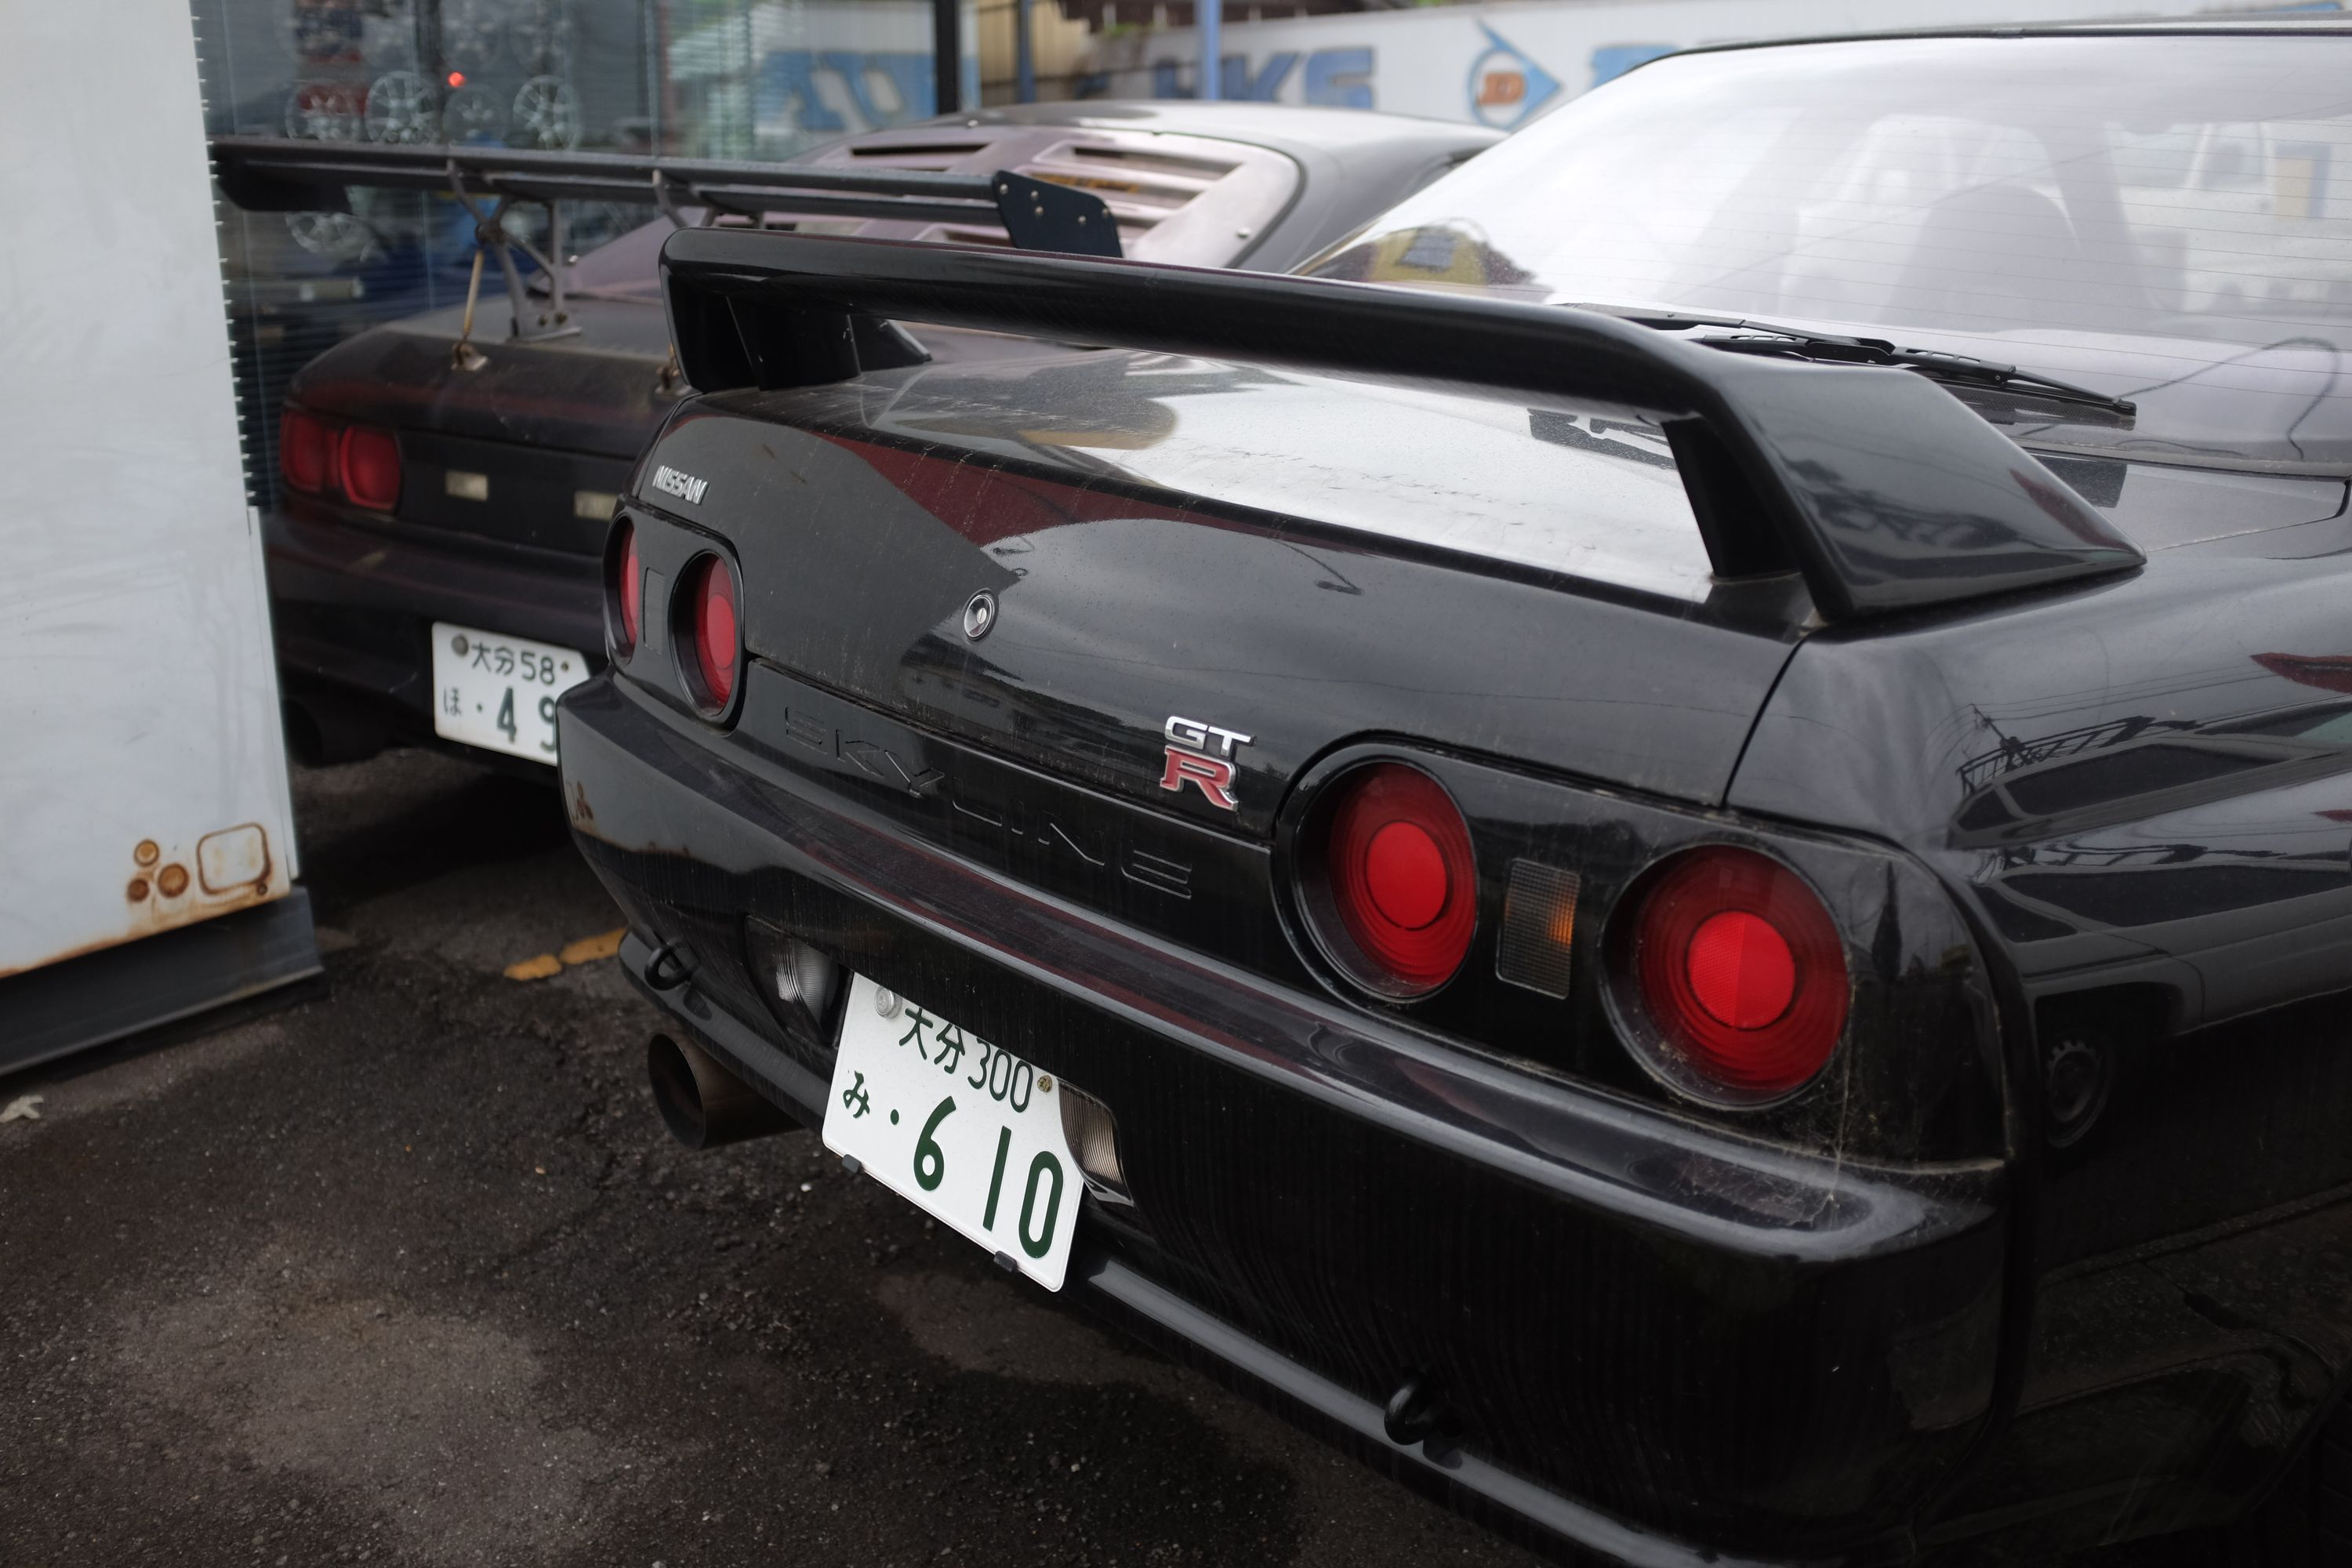 The rear ends of two black Nissan Skyline GT-R’s.